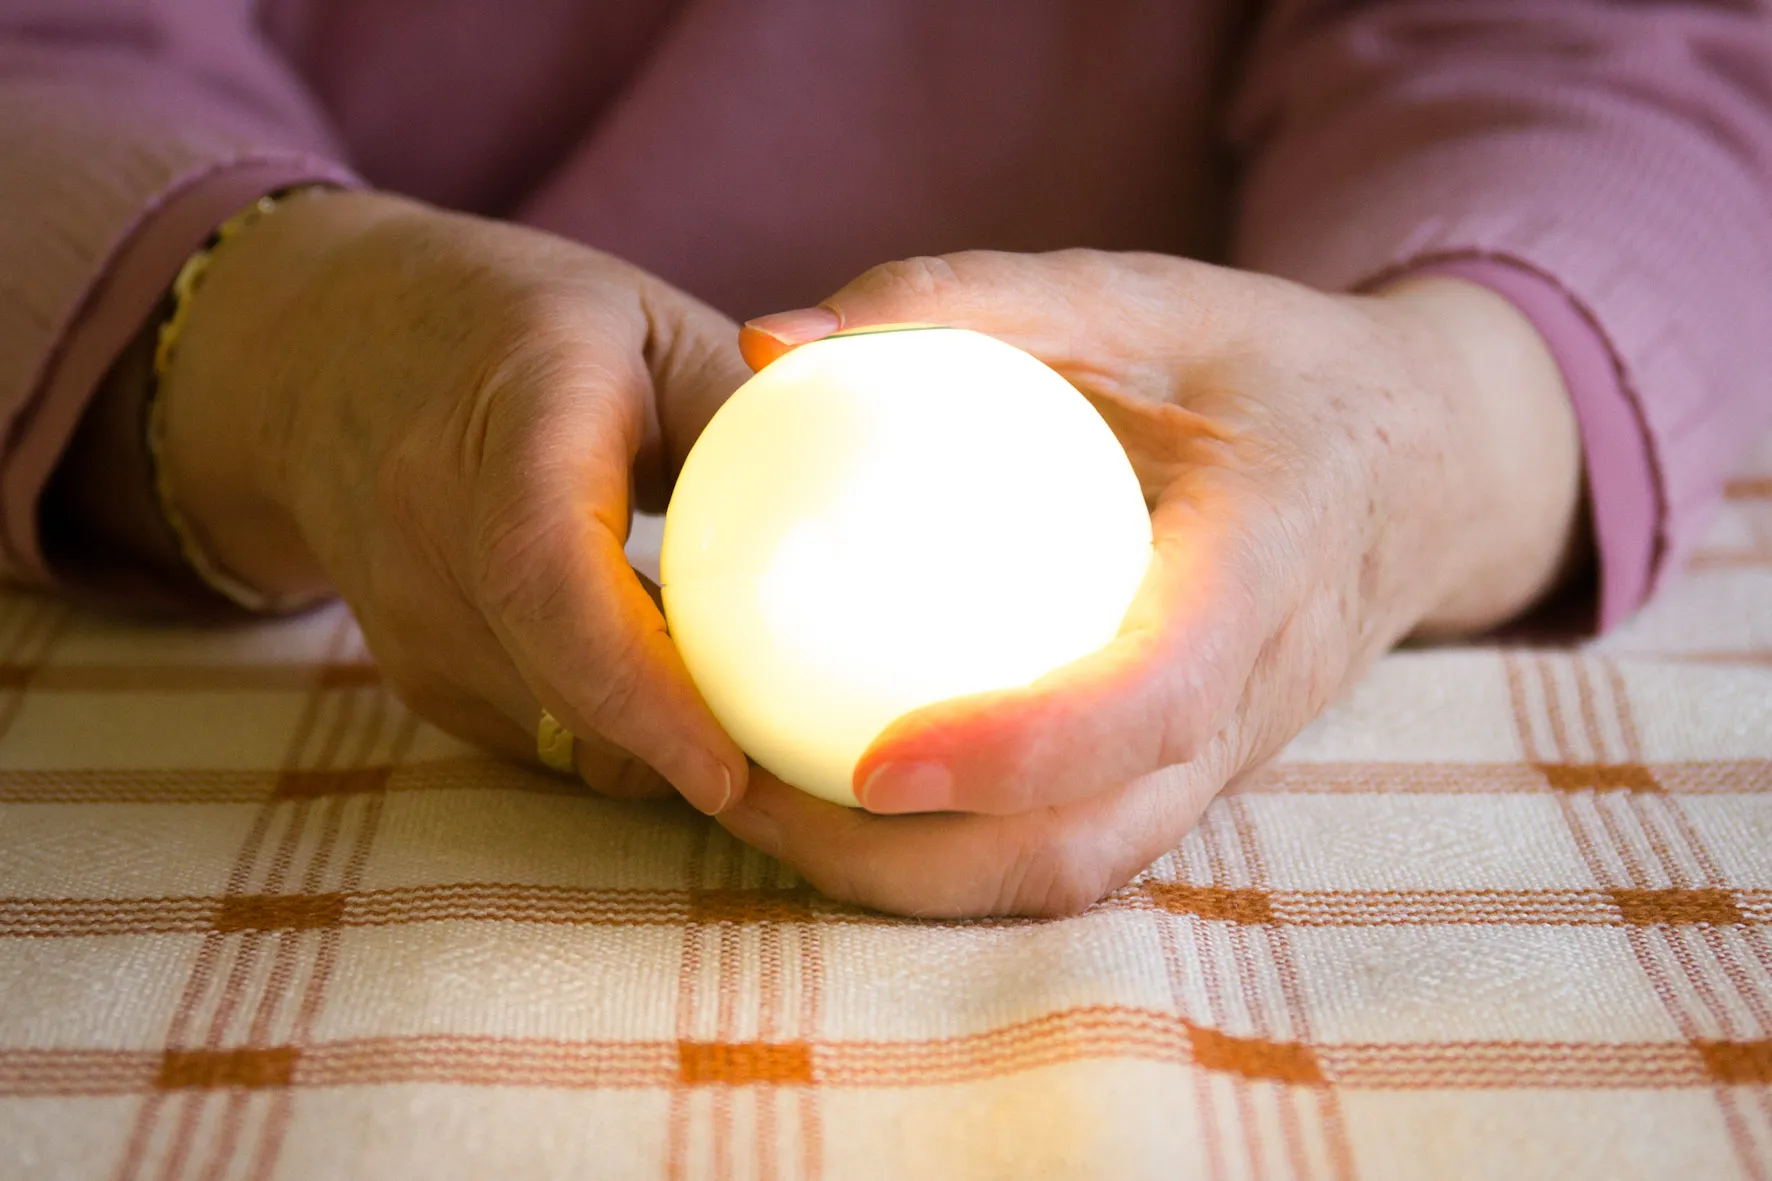 Fillip is an illuminated ball designed to stimulate people suffering from dementia.